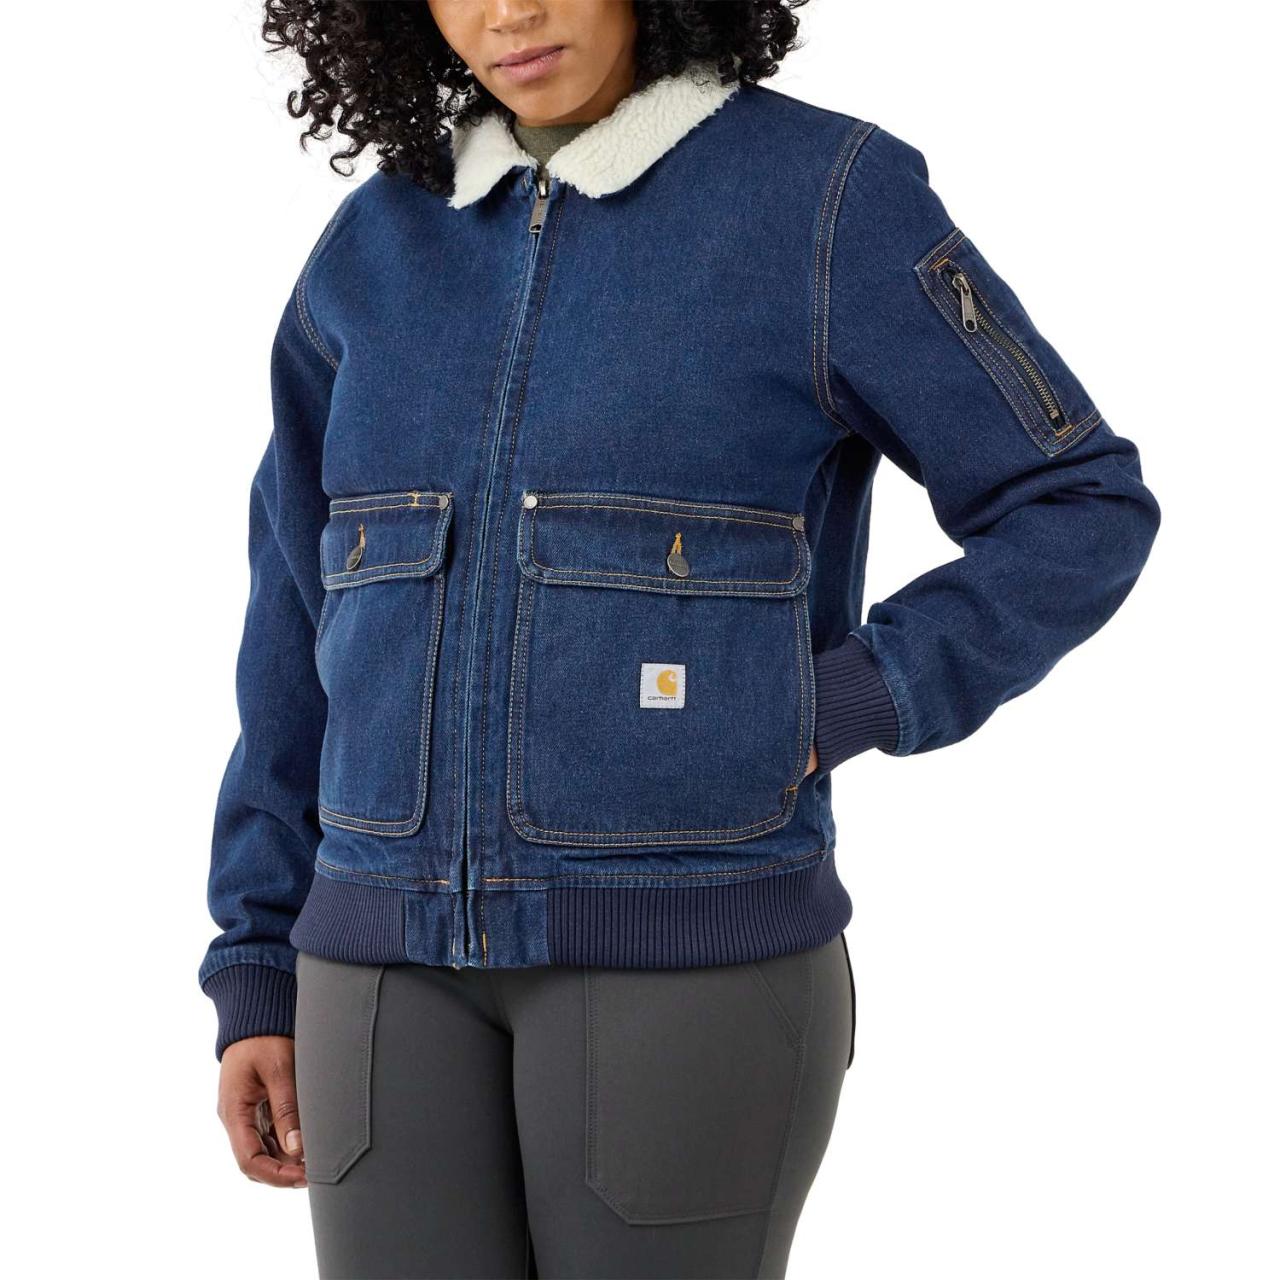 Relaxed Fit Denim Sherpa Lined Jacket, Beech